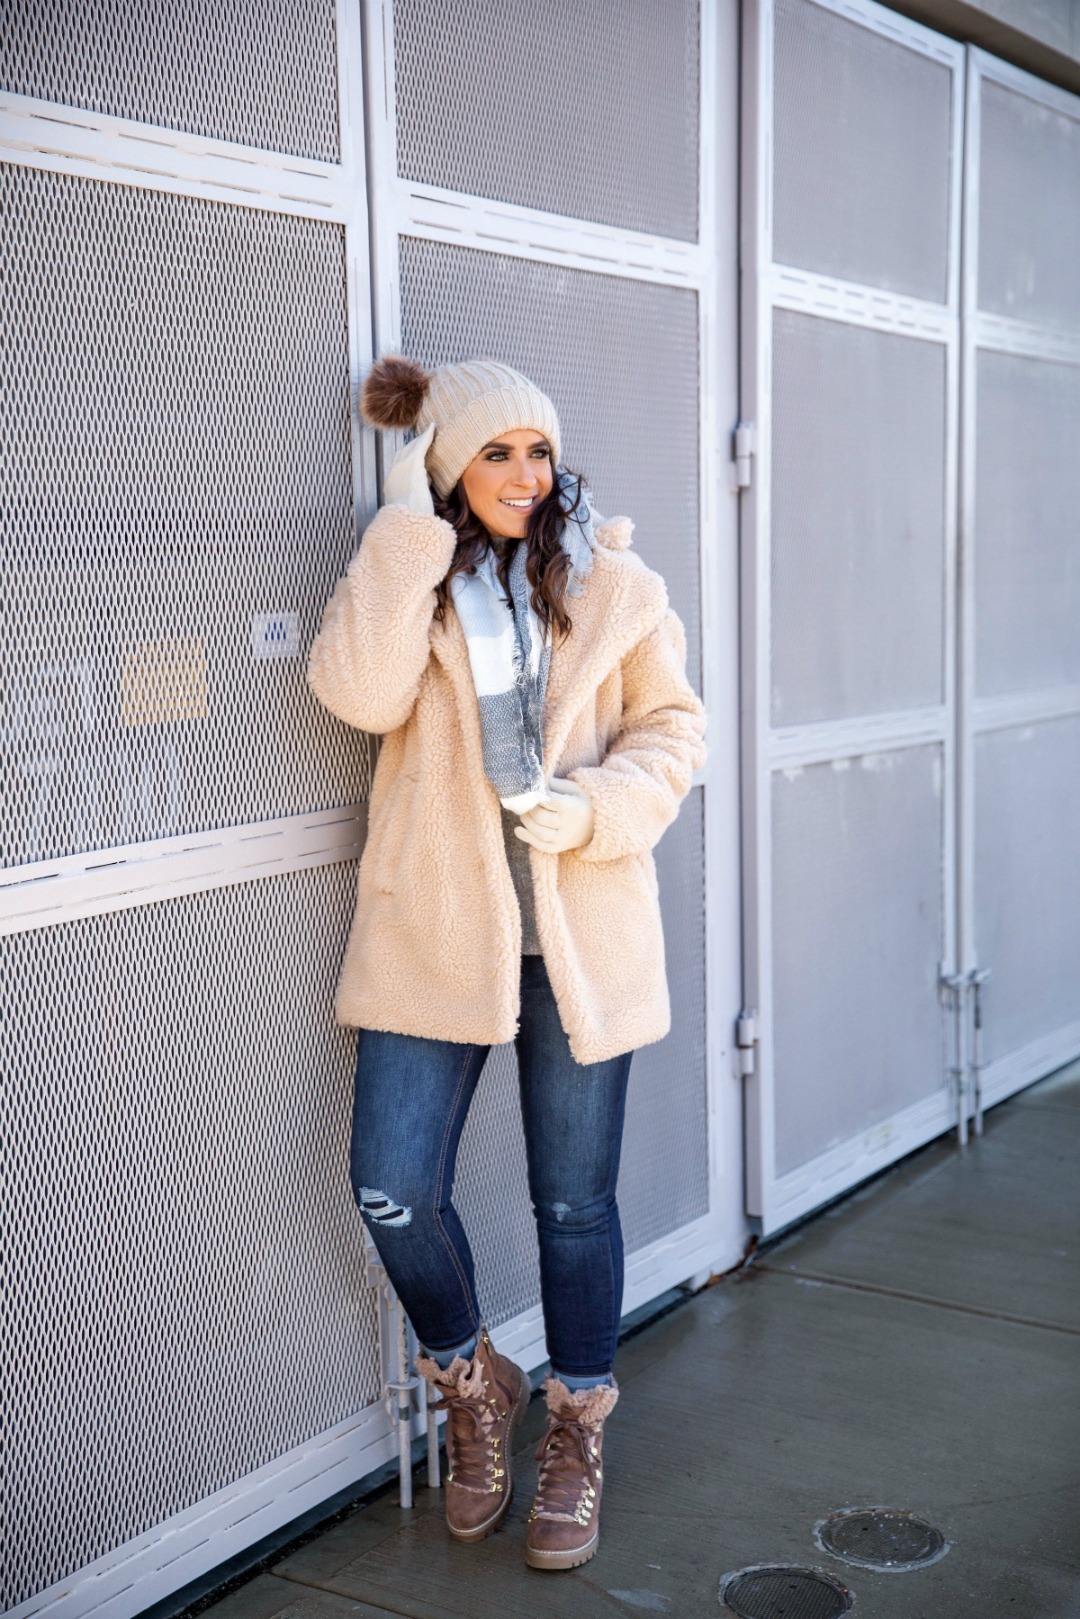 Blogger Sarah Lindner of The House Of Sequins wearing a camel sherpa teddy coat from Walmart